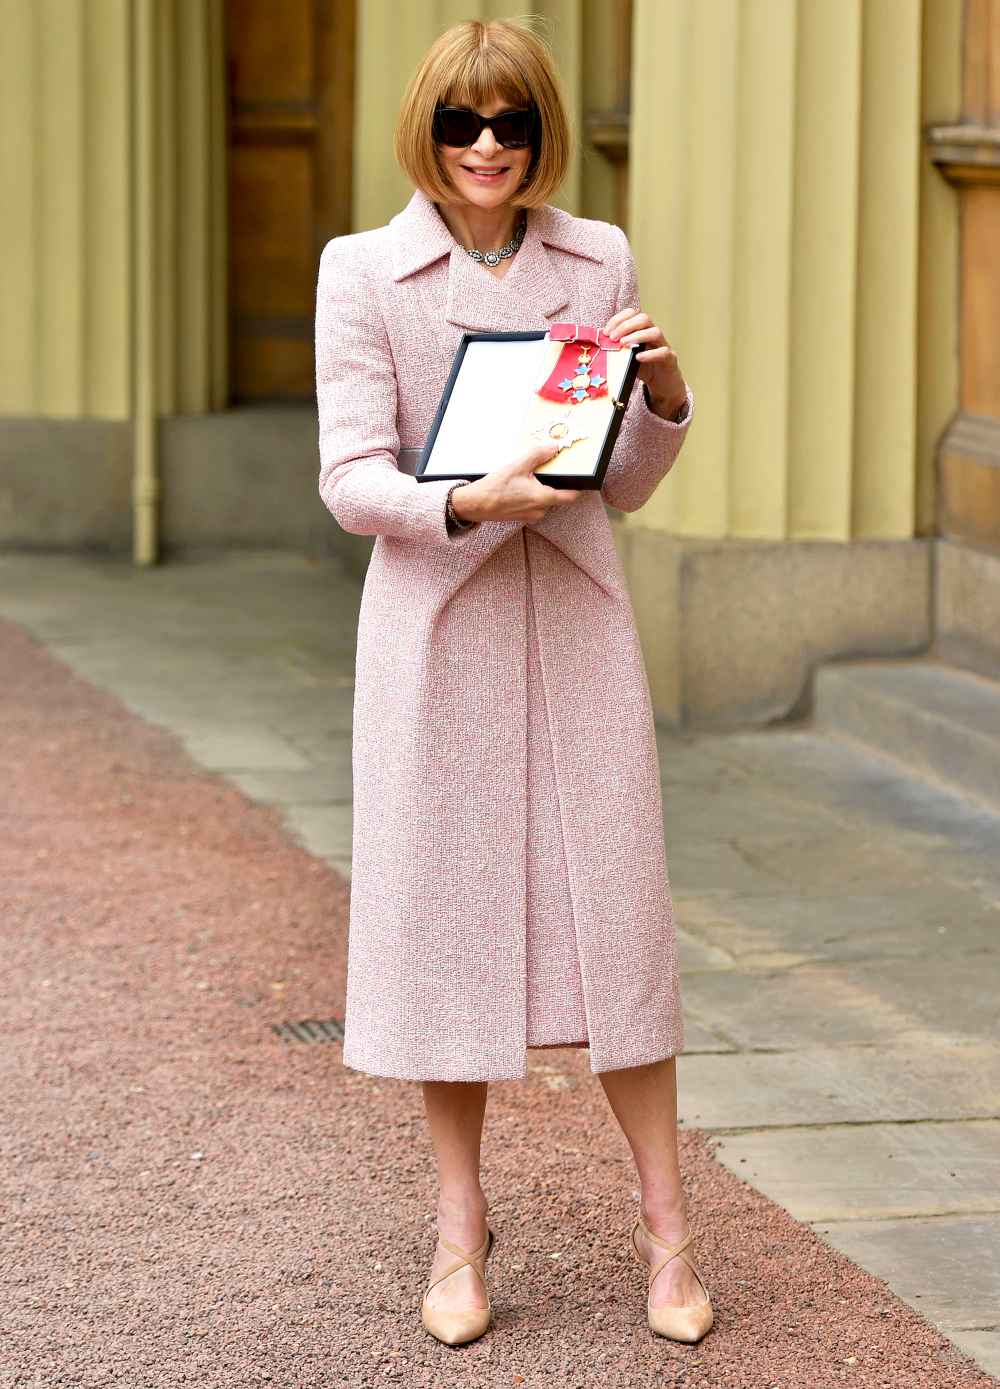 Vogue's Anna Wintour Made a Dame by Queen Elizabeth II